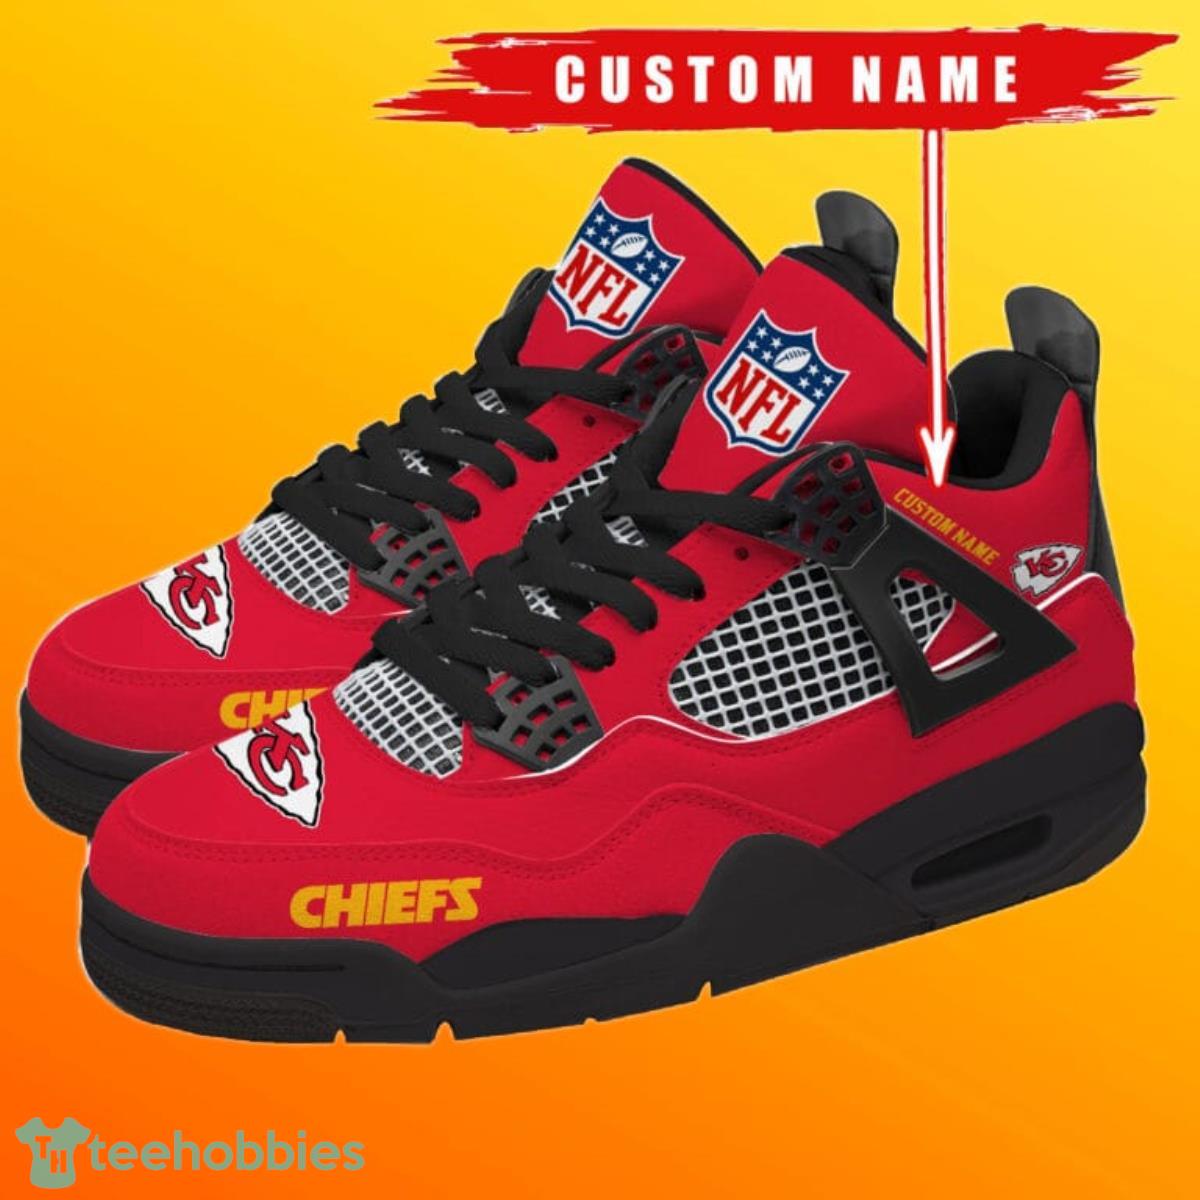 Nfl Kansas City Chiefs Limited Edition Air Jordan 13 For Fans Sneakers